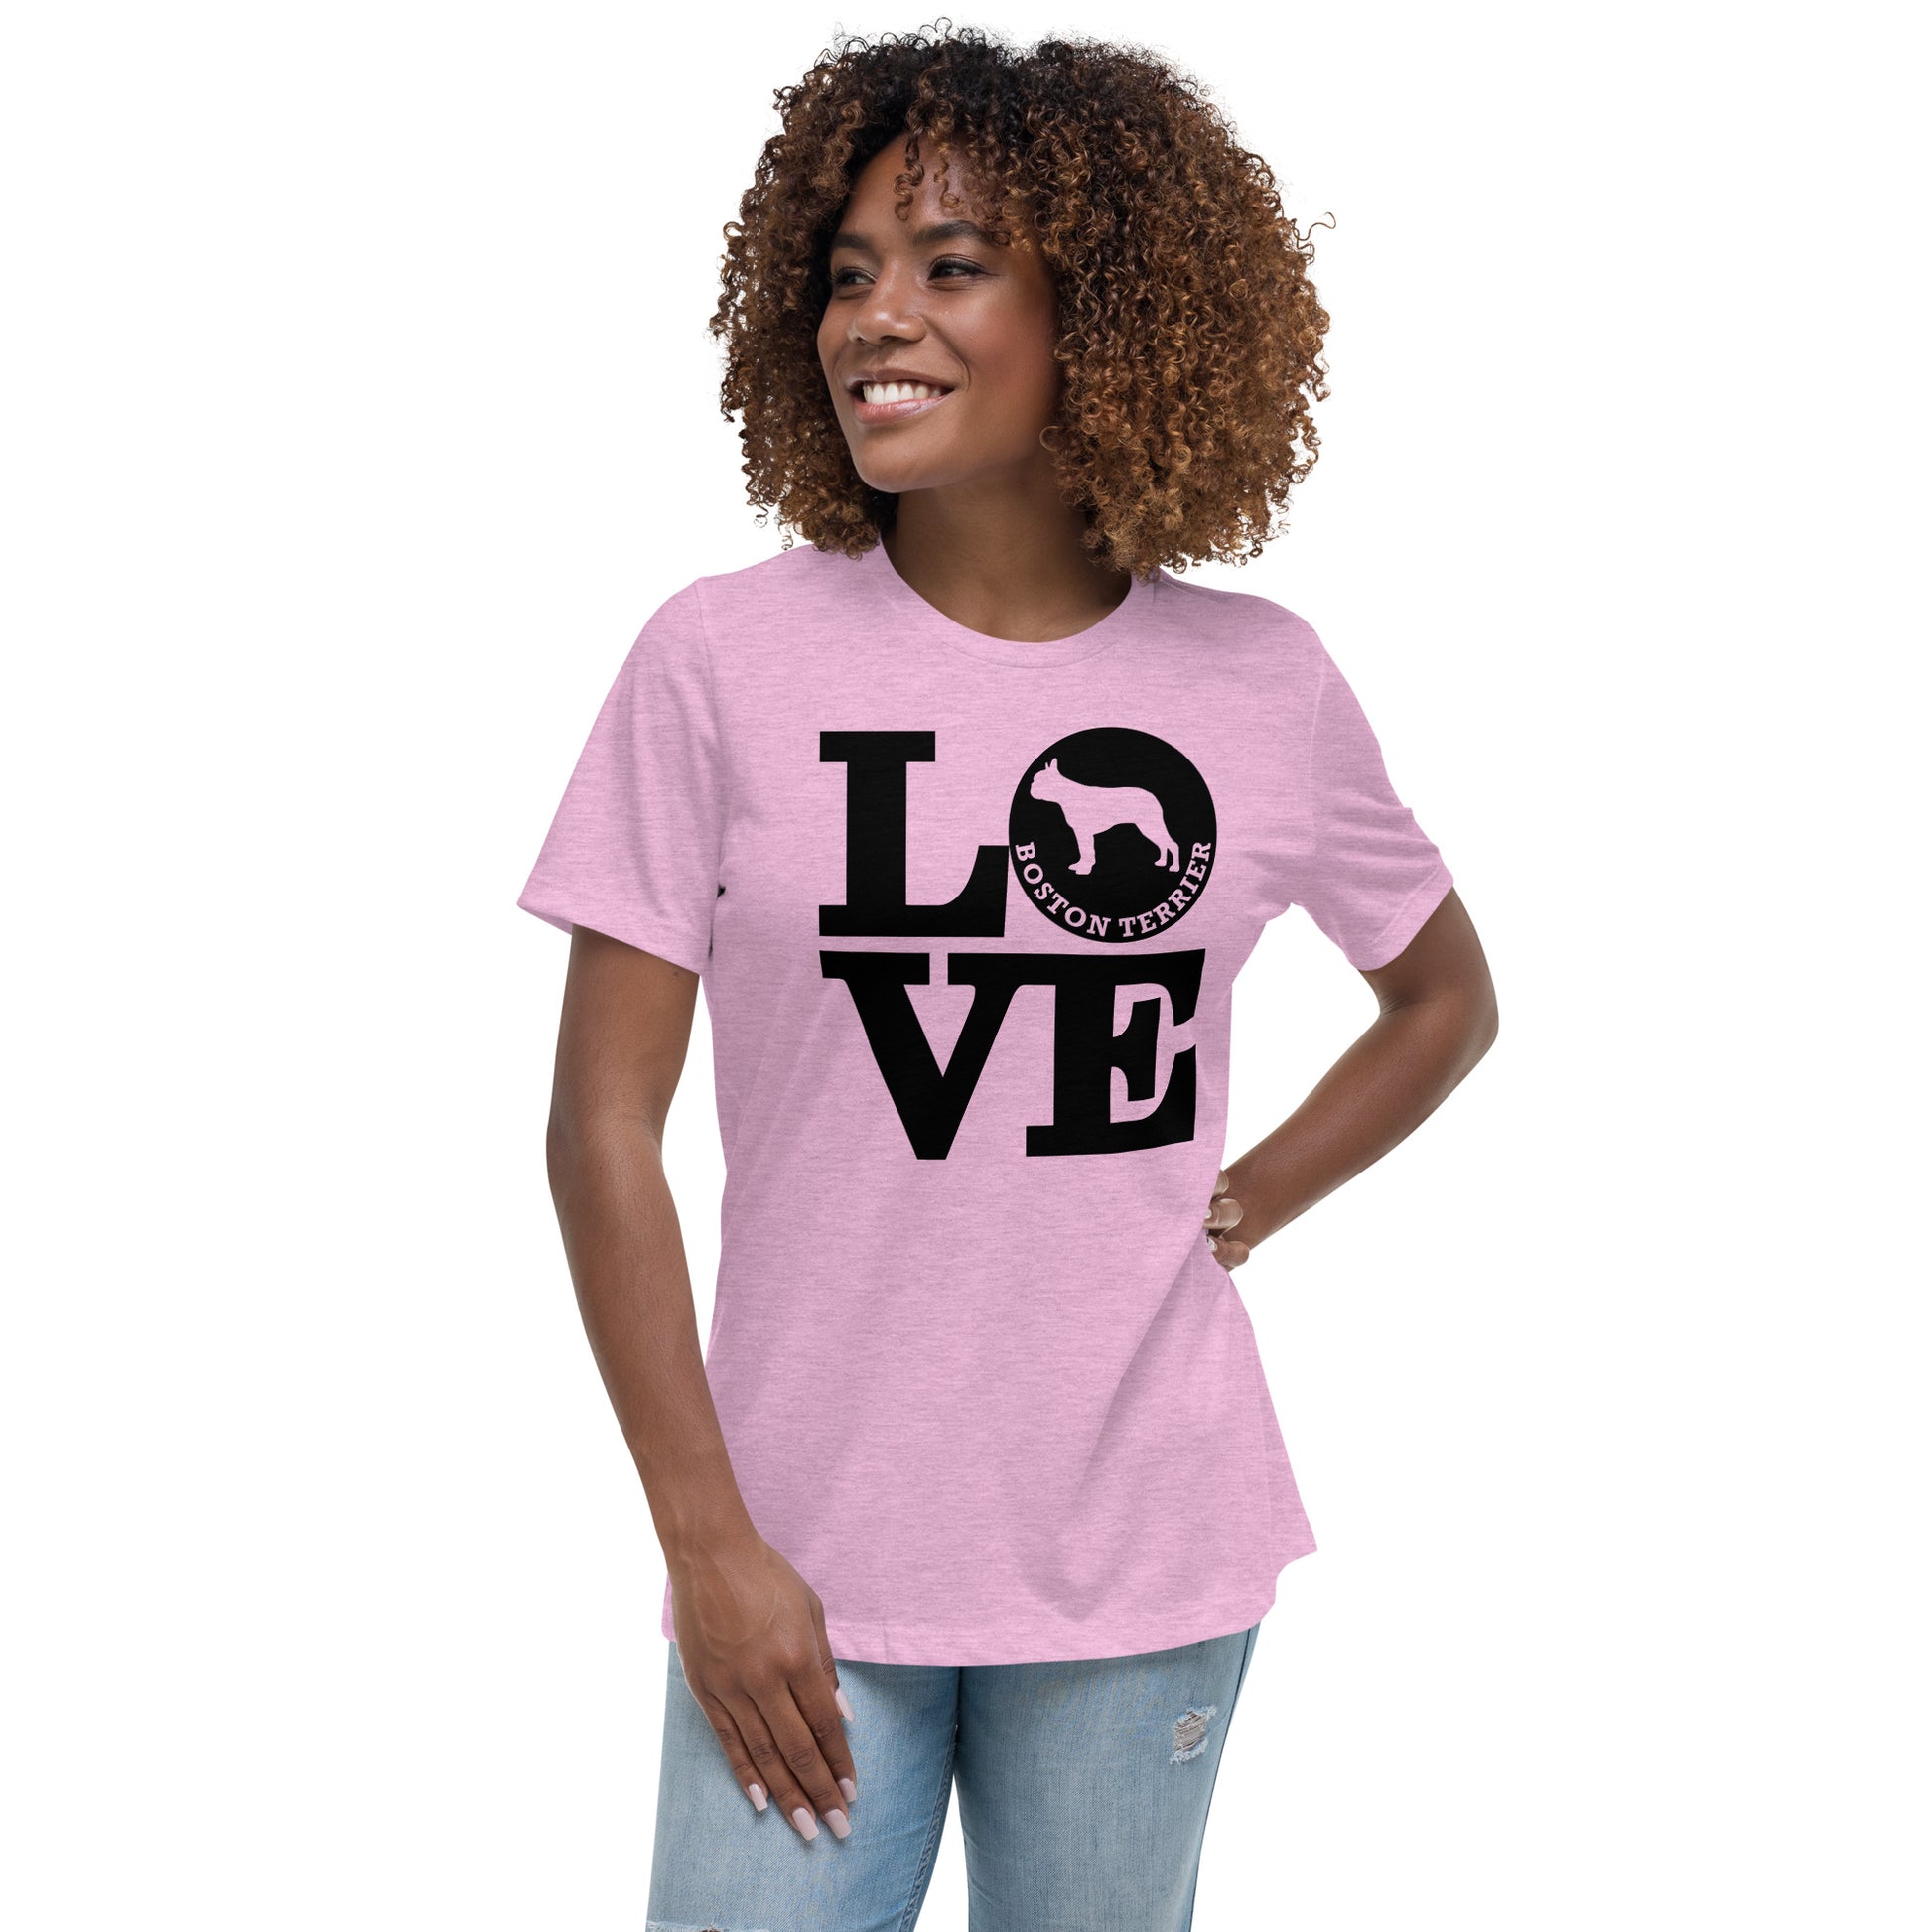 Boston Terrier Love women’s heather prism lilac t-shirt by Dog Artistry.